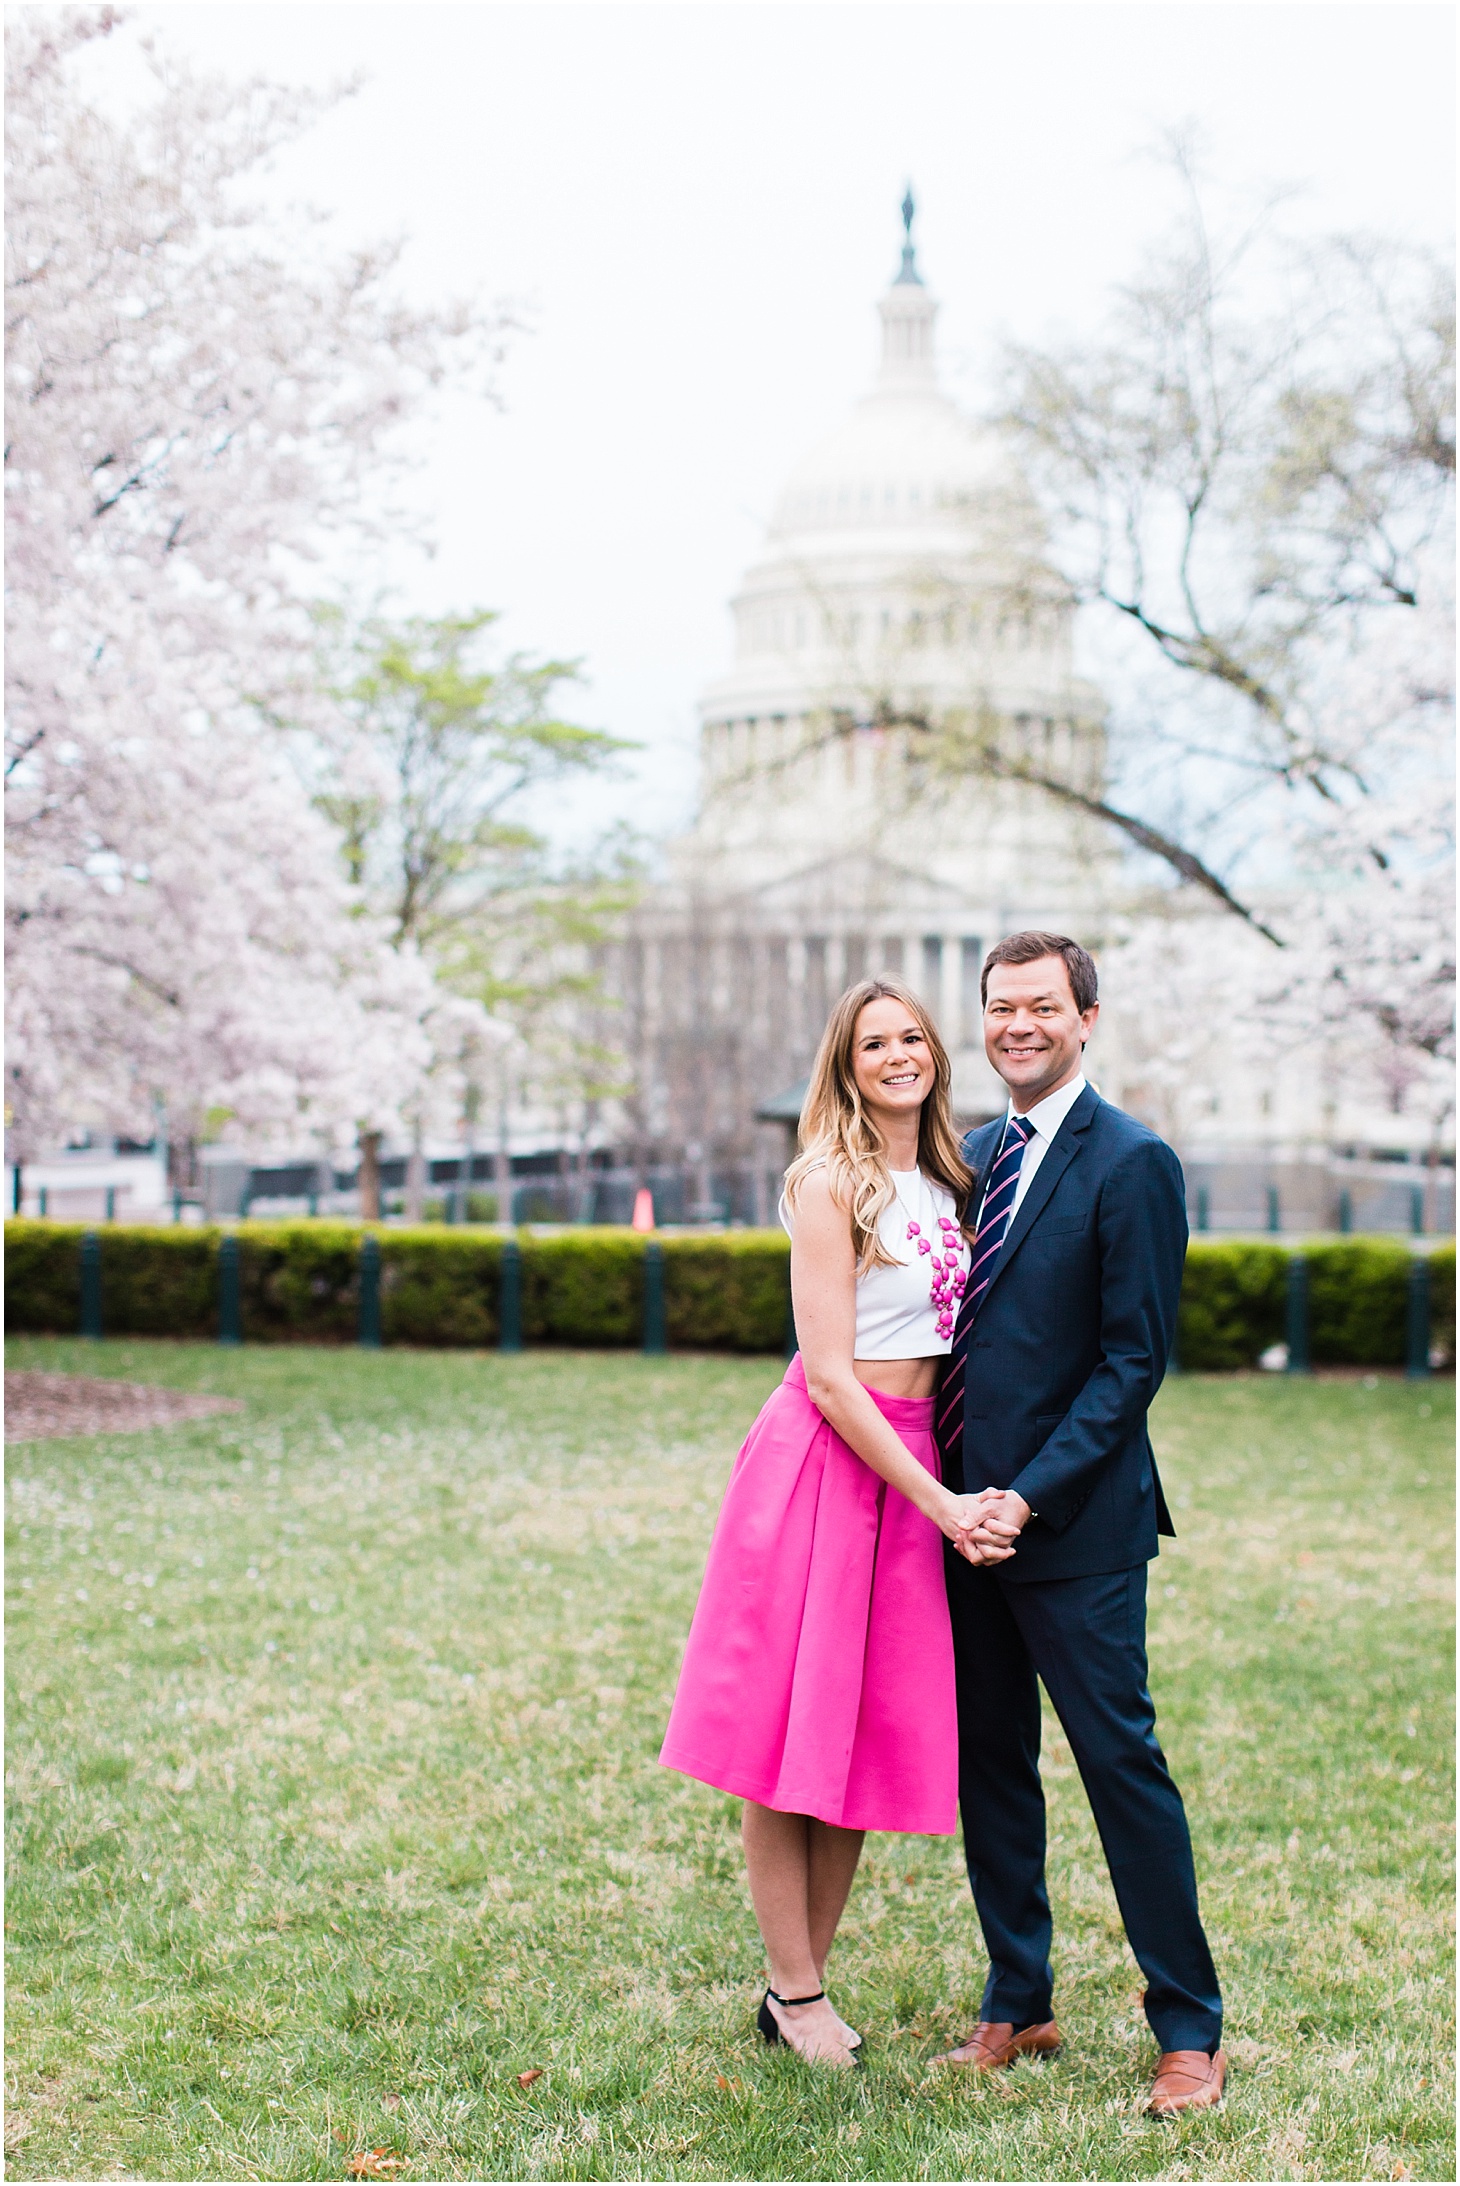 Engagement Portraits with Cherry Blossoms at Capitol, Spring Sunrise Engagement at US Capitol and Yards Park, Sarah Bradshaw Photography, DC Wedding Photographer